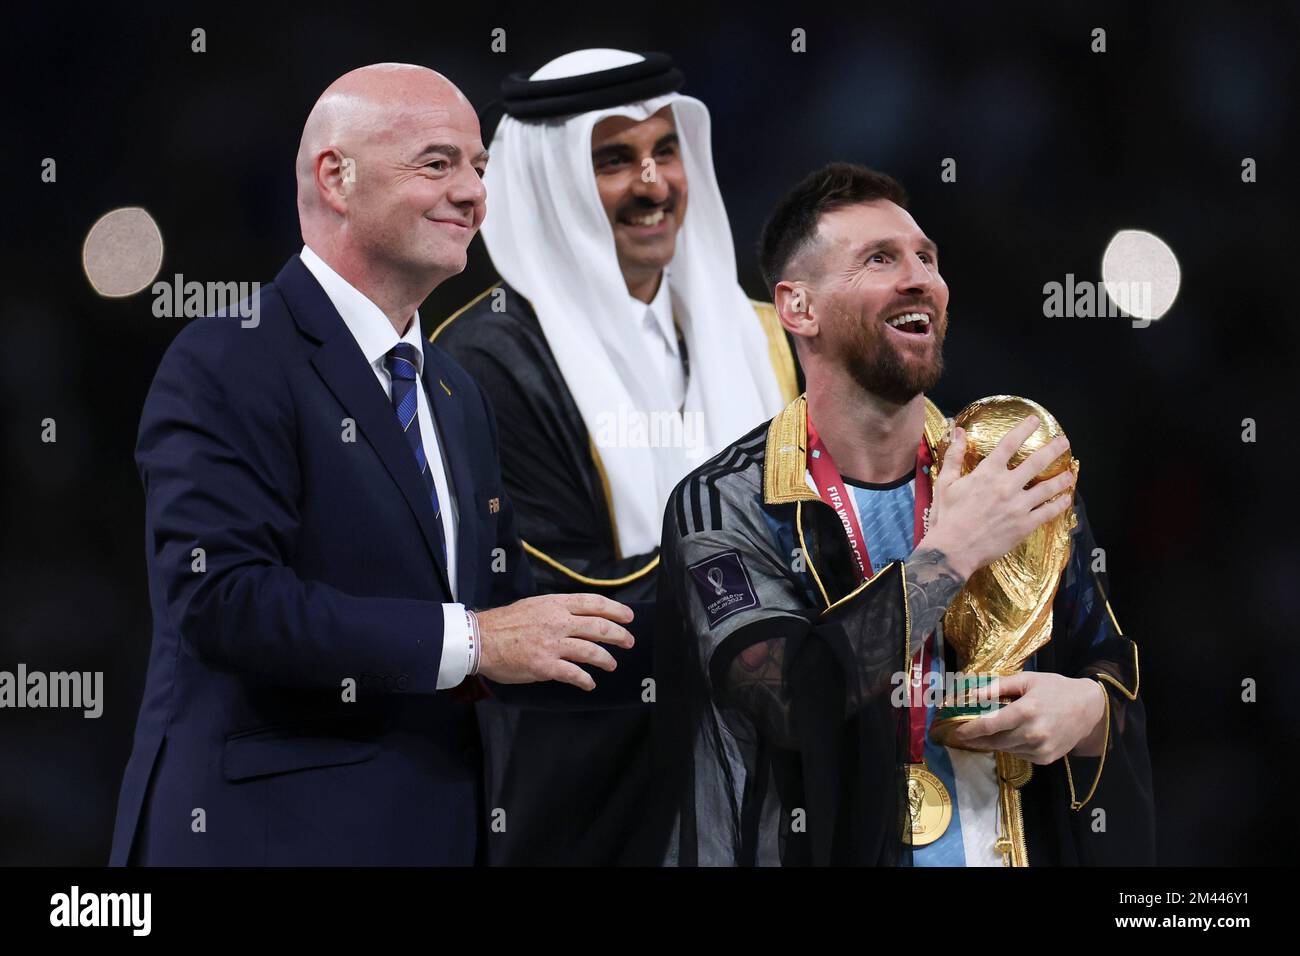 Lusaier, Qatar. 18th Dec, 2022. FIFA President Gianni Infantino (L) and The Emir of Qatar Sheikh Tamim bin Hamad Al Thani (C) and Lionel Messi of Argentina react during the awarding ceremony of the 2022 FIFA World Cup at Lusail Stadium in Lusail, Qatar, Dec. 18, 2022. Credit: Li Ming/Xinhua/Alamy Live News/Alamy Live News Stock Photo